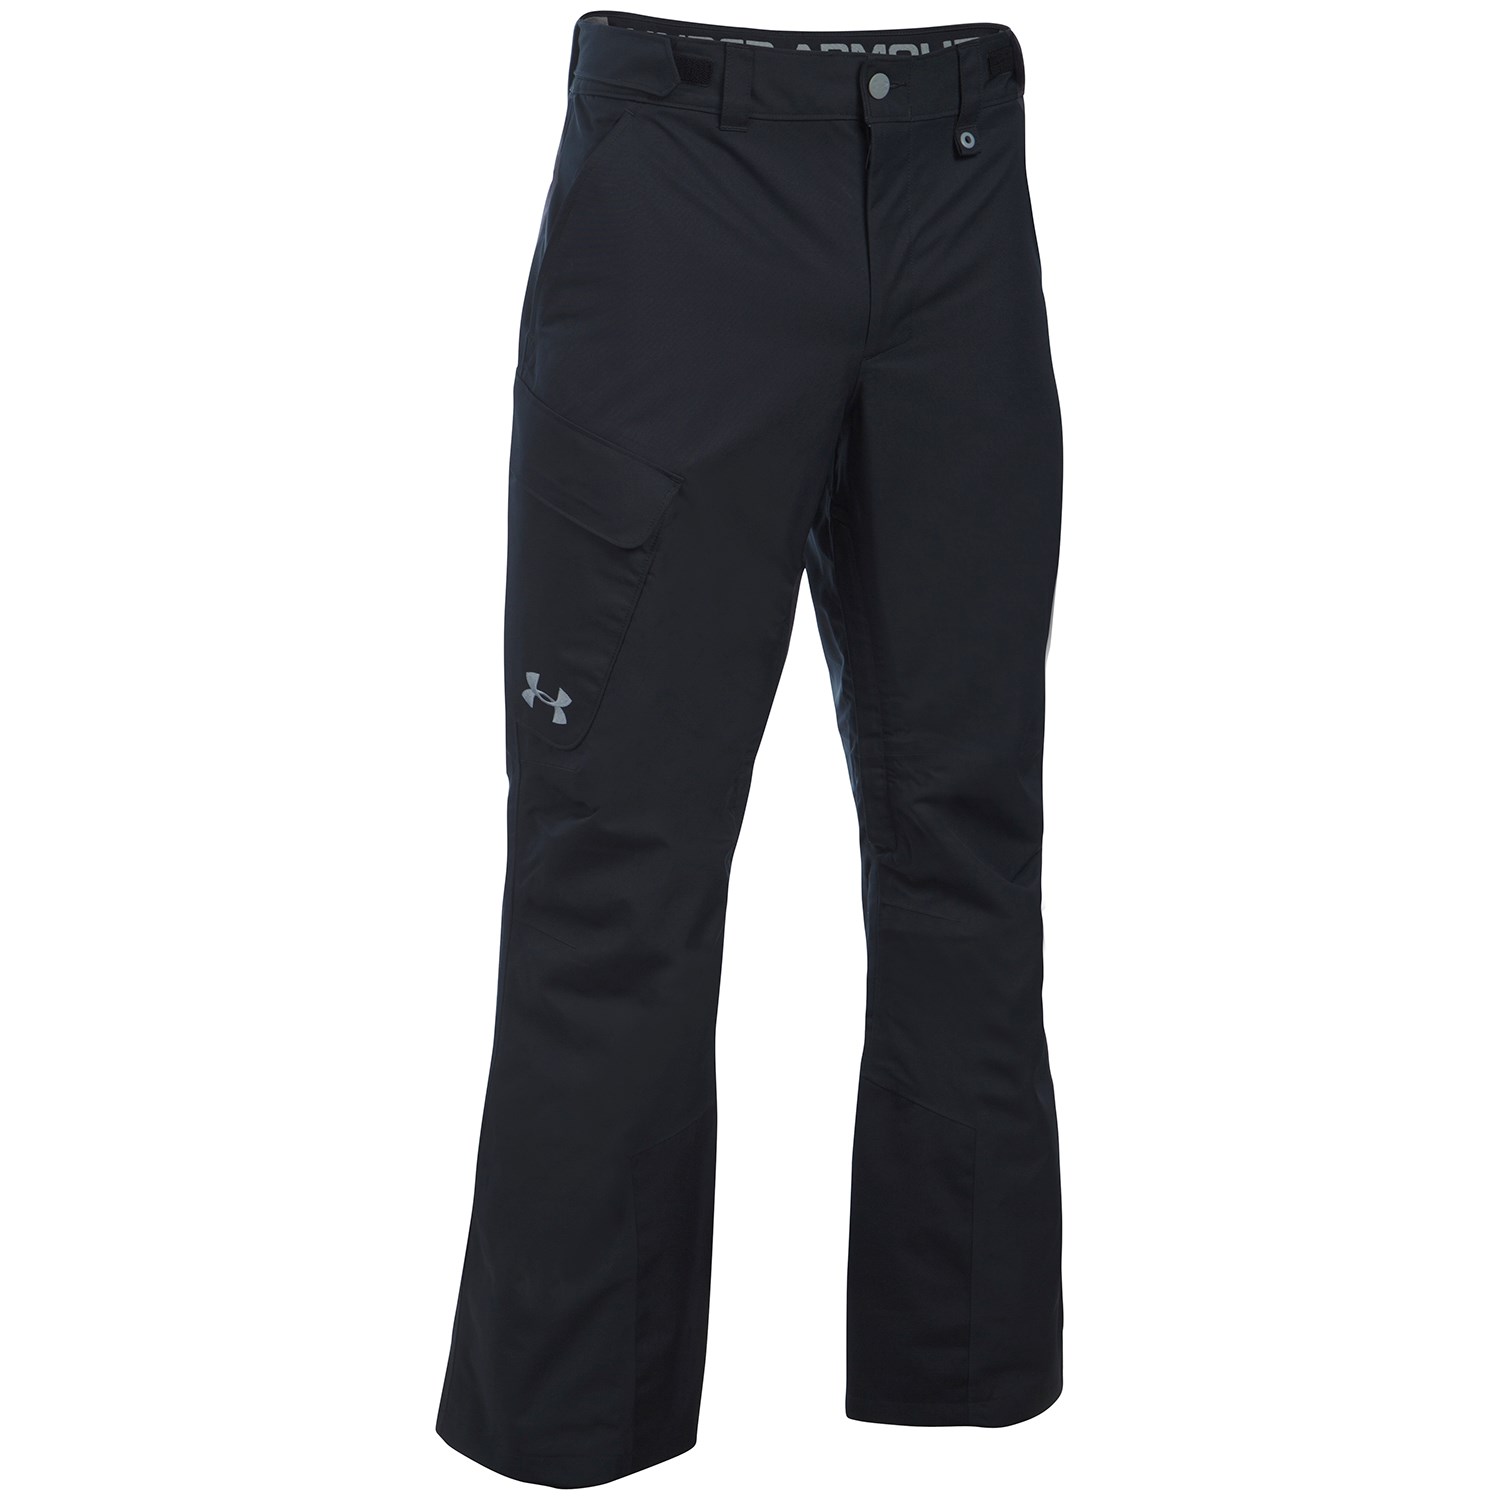 Under Armour Womens ColdGear Infrared Chutes Snowboard Ski Pants Small